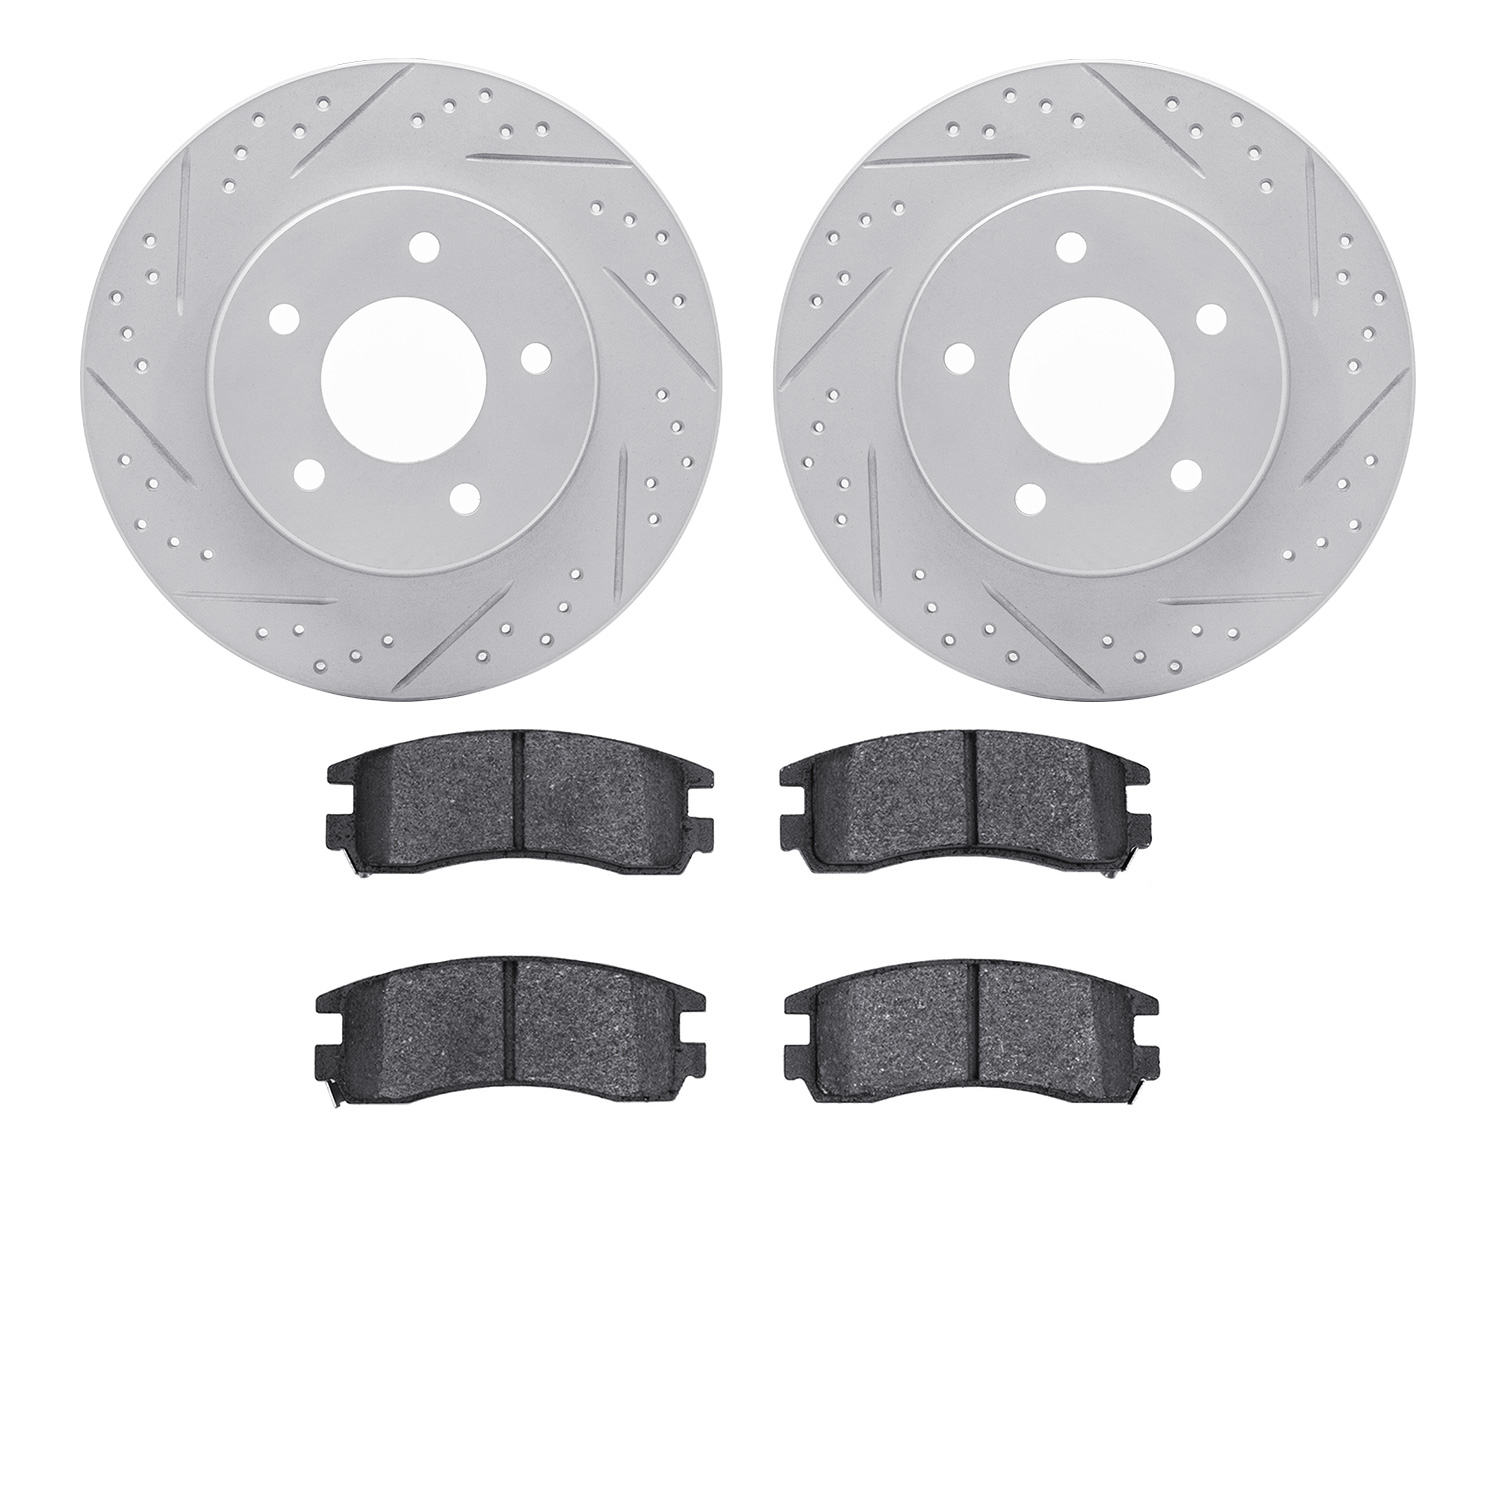 2502-52001 Geoperformance Drilled/Slotted Rotors w/5000 Advanced Brake Pads Kit, 1992-1998 GM, Position: Rear